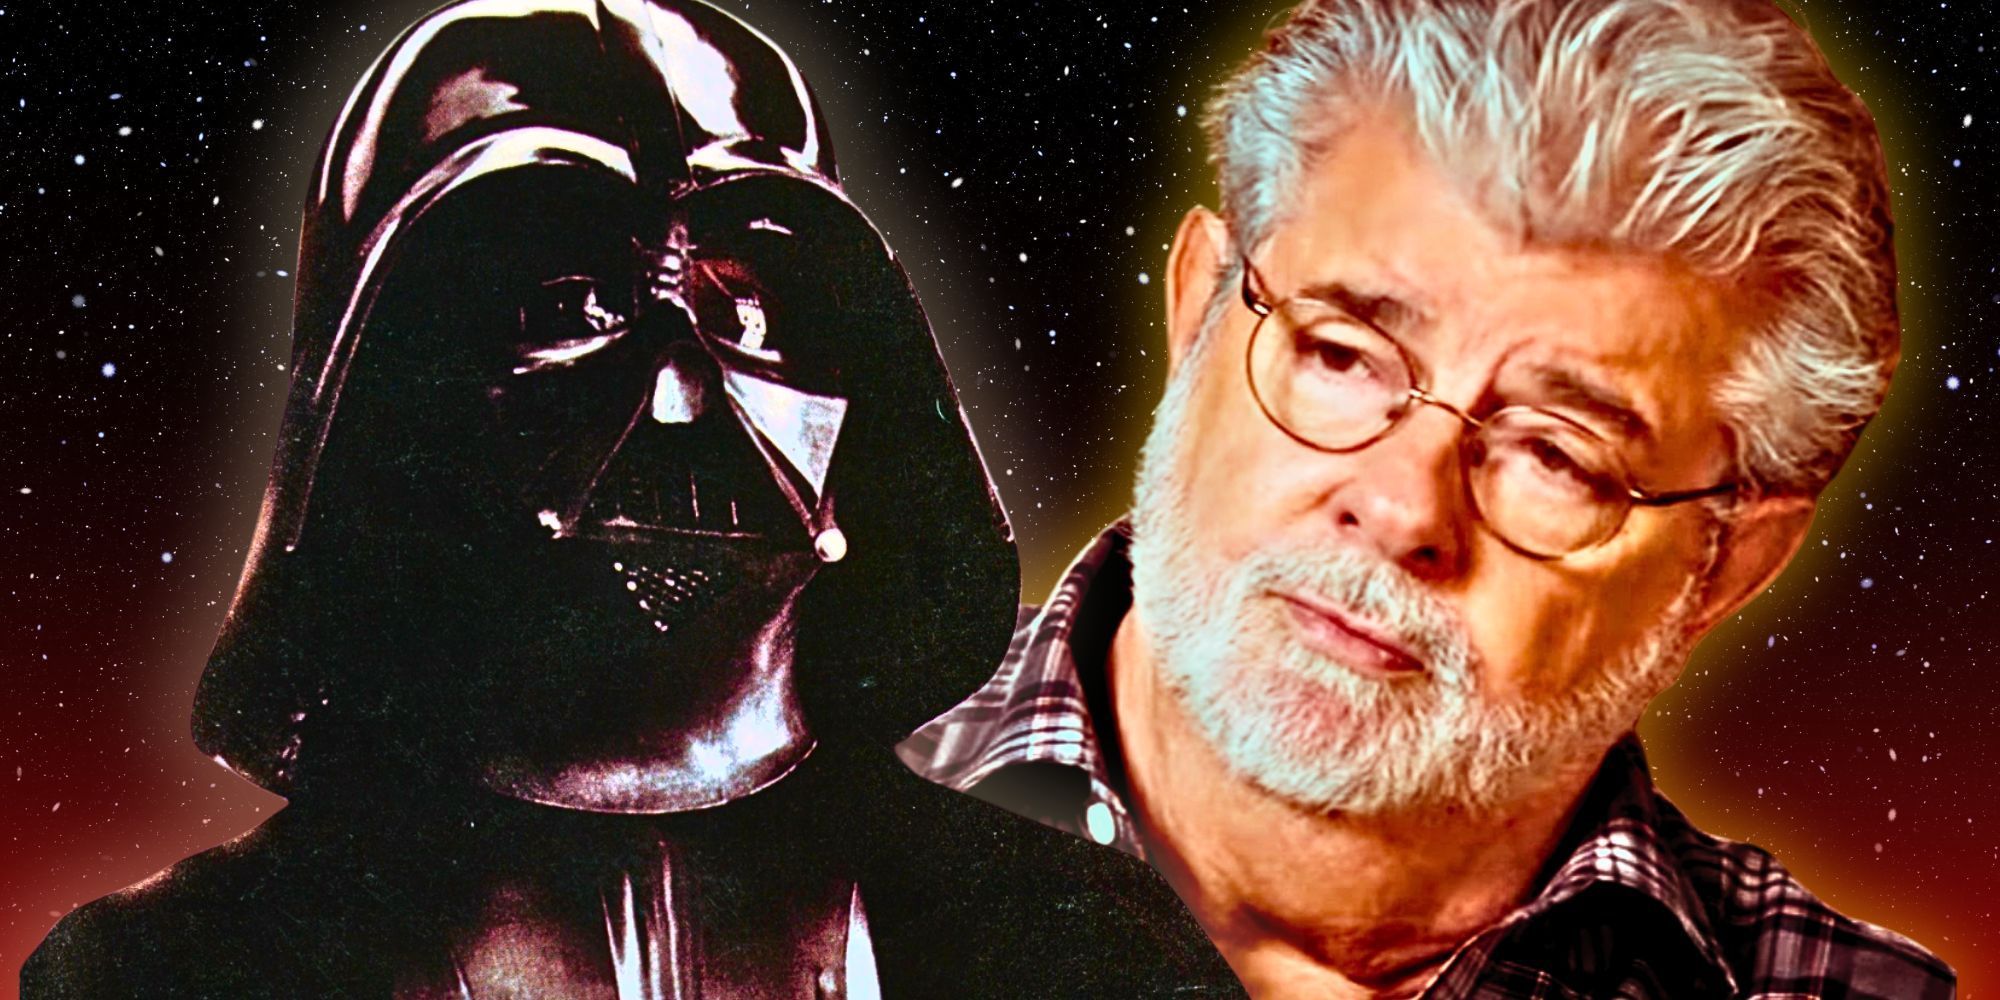 Darth Vader in Star Wars and George Lucas.